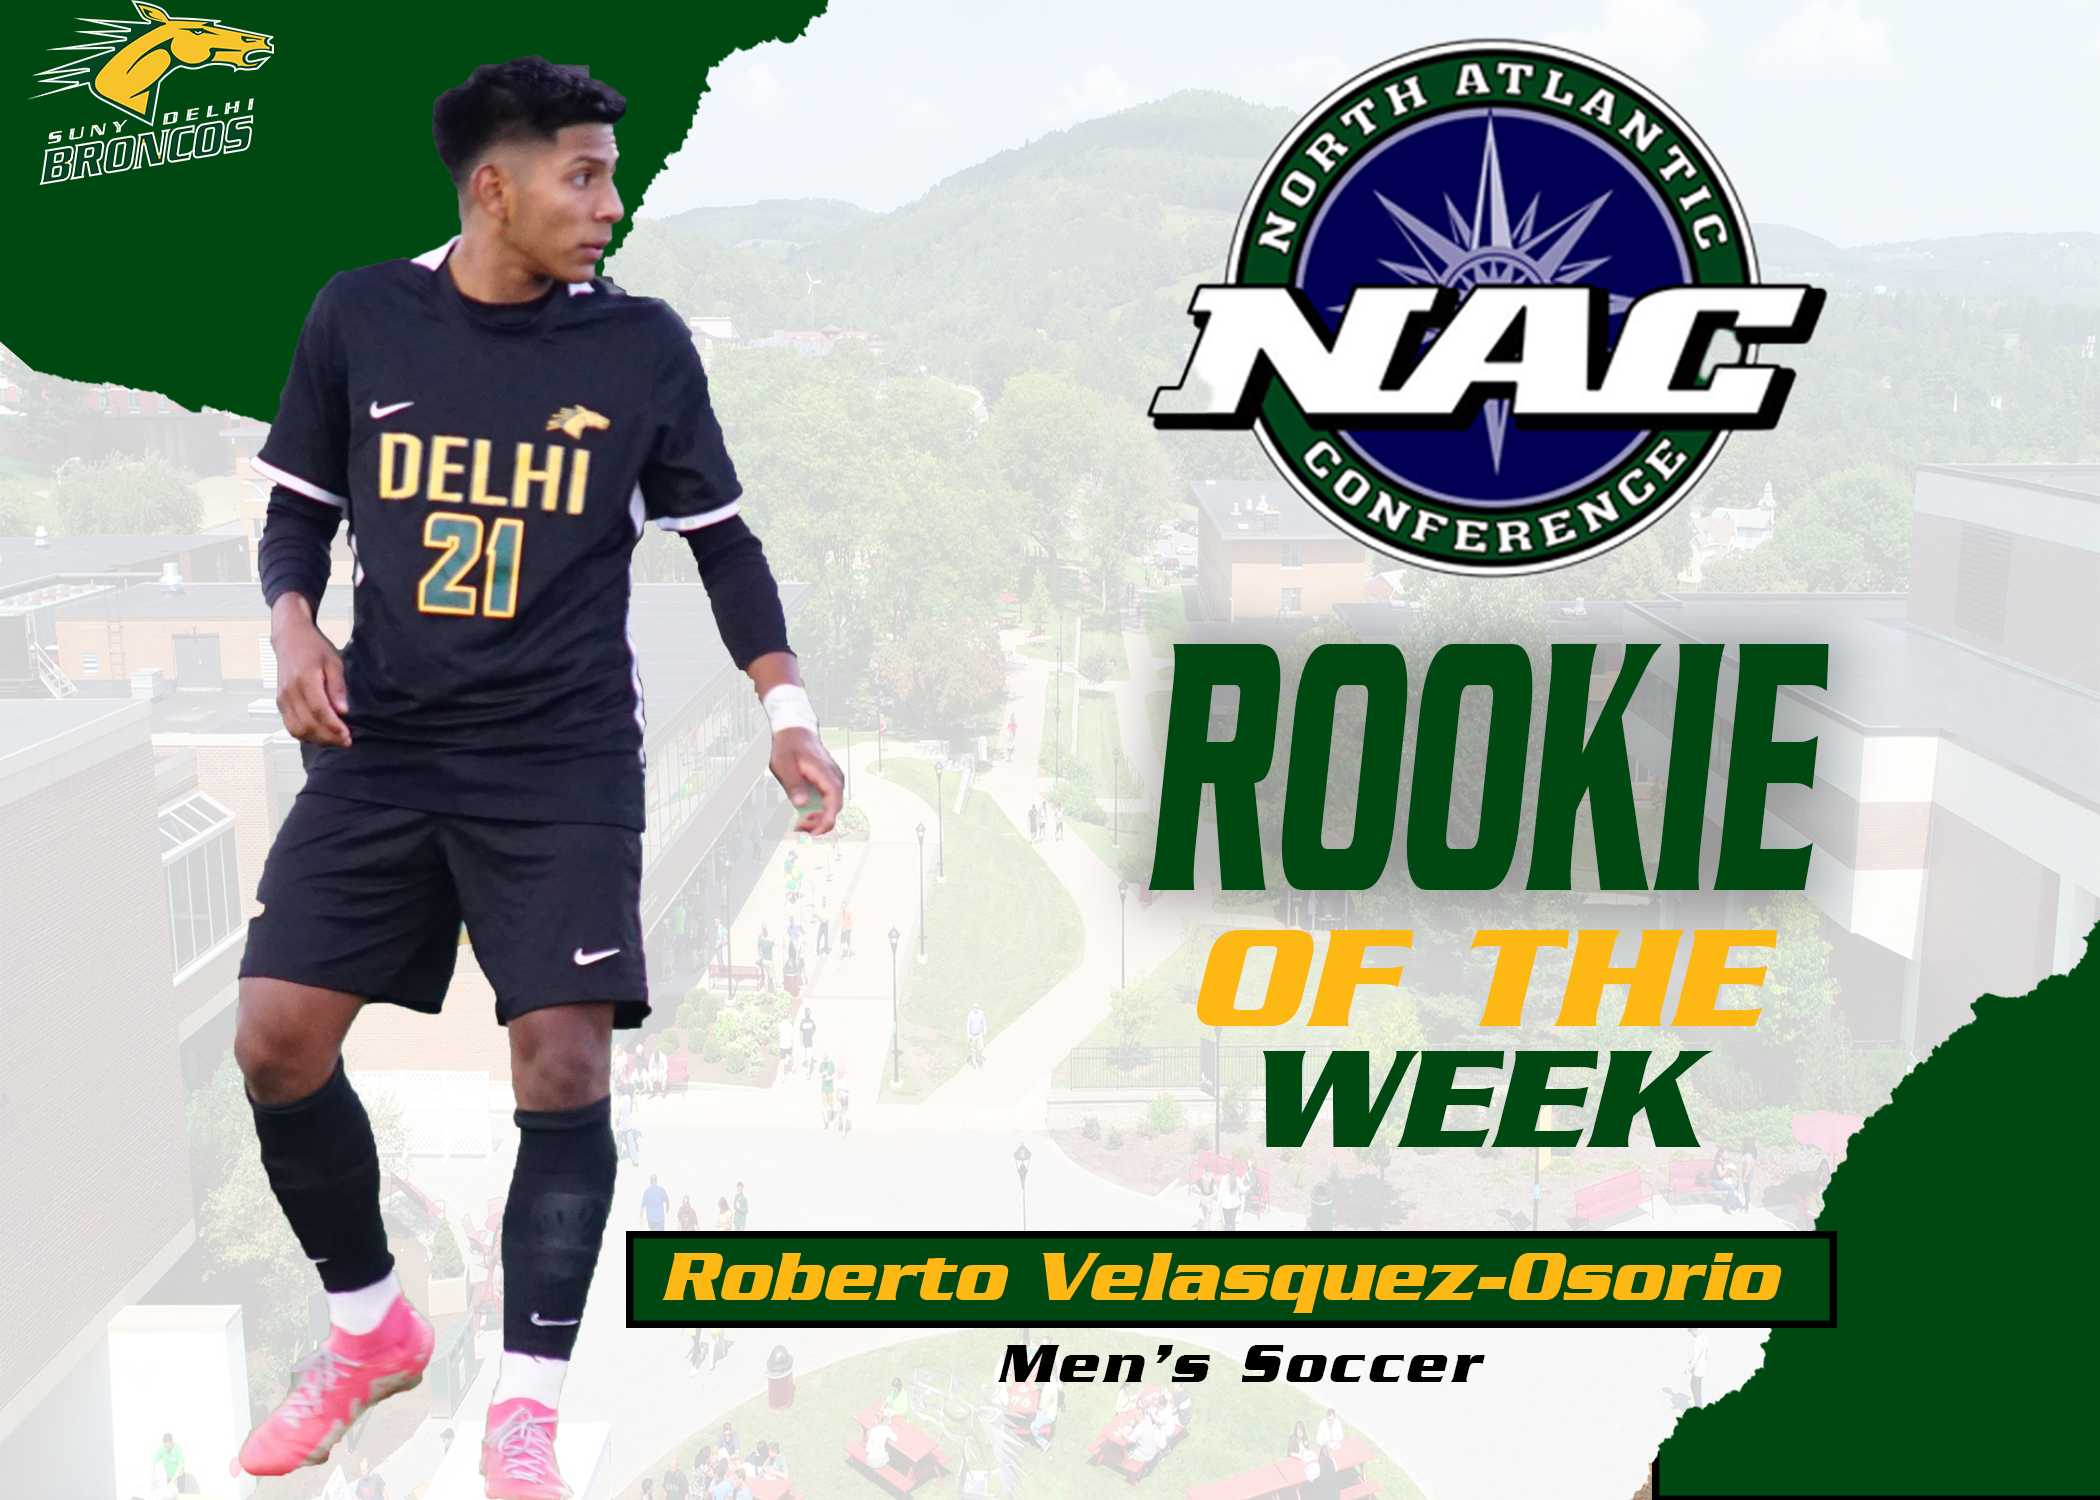 Roberto Velasquez-Osorio wins second consecutive NAC Rookie of the Week